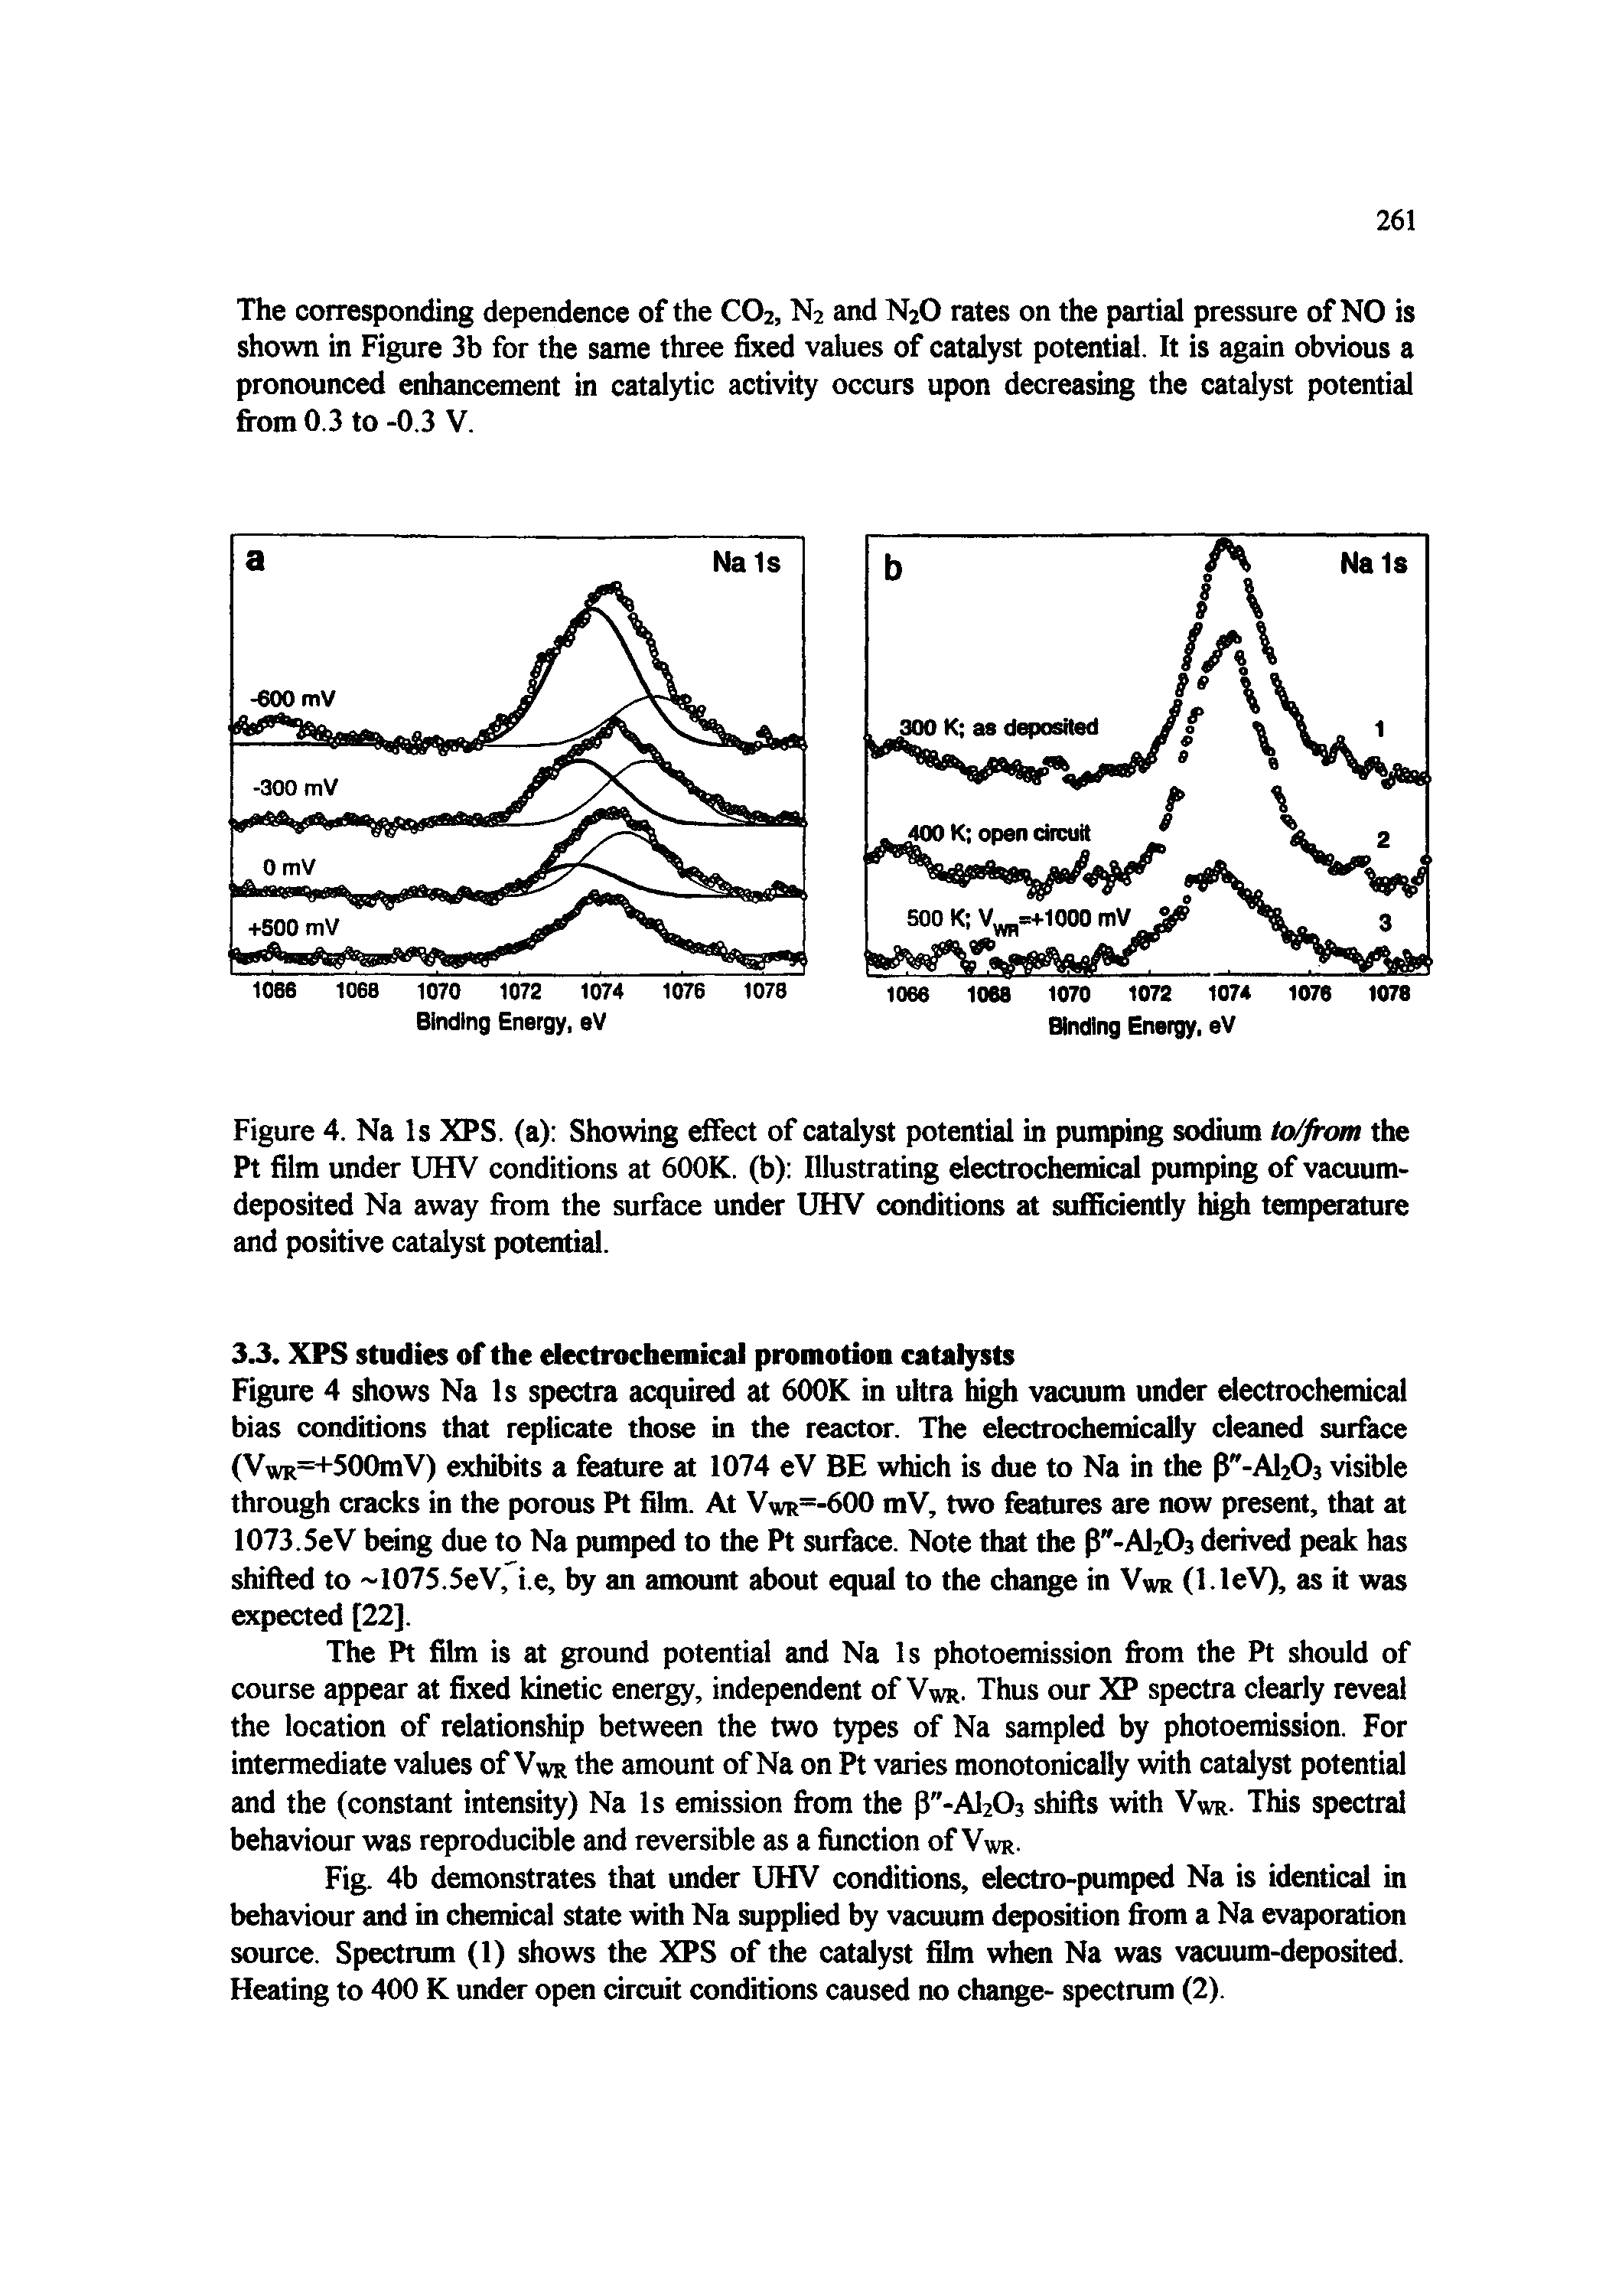 Figure 4. Na Is XPS. (a) Showing effect of catalyst potential in pumping sodium to/from the Pt film under UHV conditions at 600K. (b) Illustrating electrochemical pumping of vacuum-deposited Na away from the surface under UHV conditions at sufficiently high temperature and positive catalyst potential.